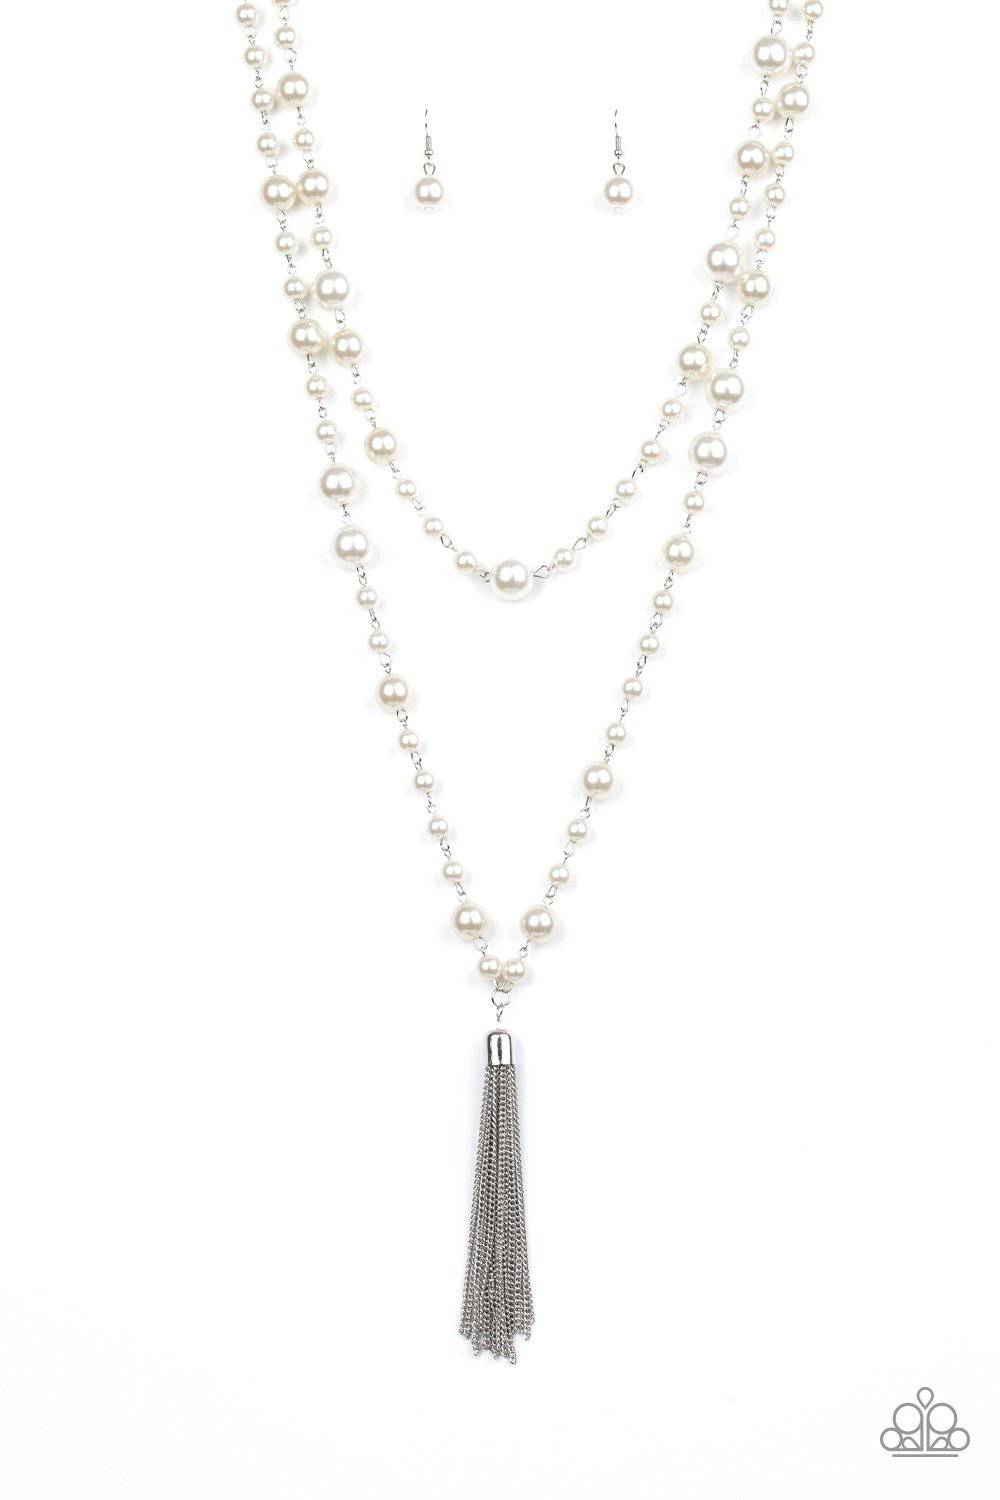 Social Hour White Necklace - Paparazzi Accessories - GlaMarous Titi Jewels